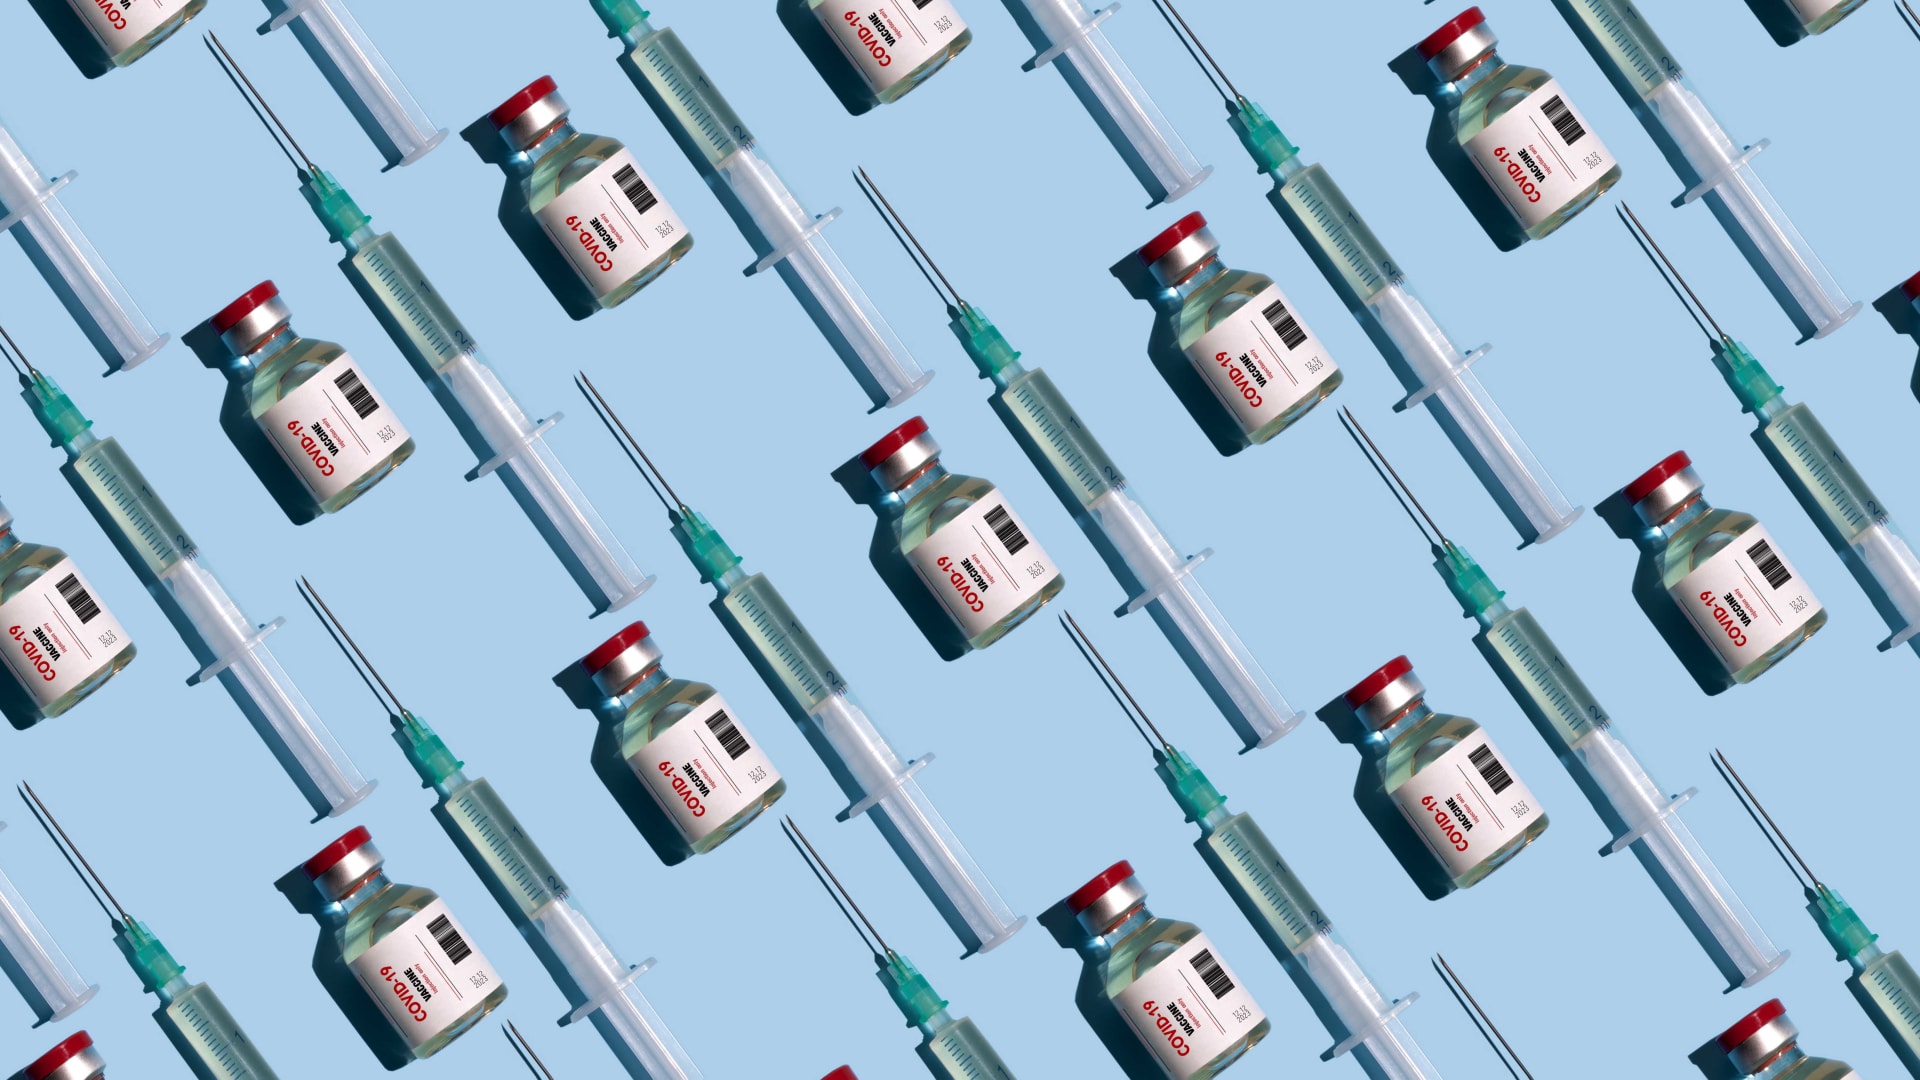 Business Needs to Step Up to Vaccines